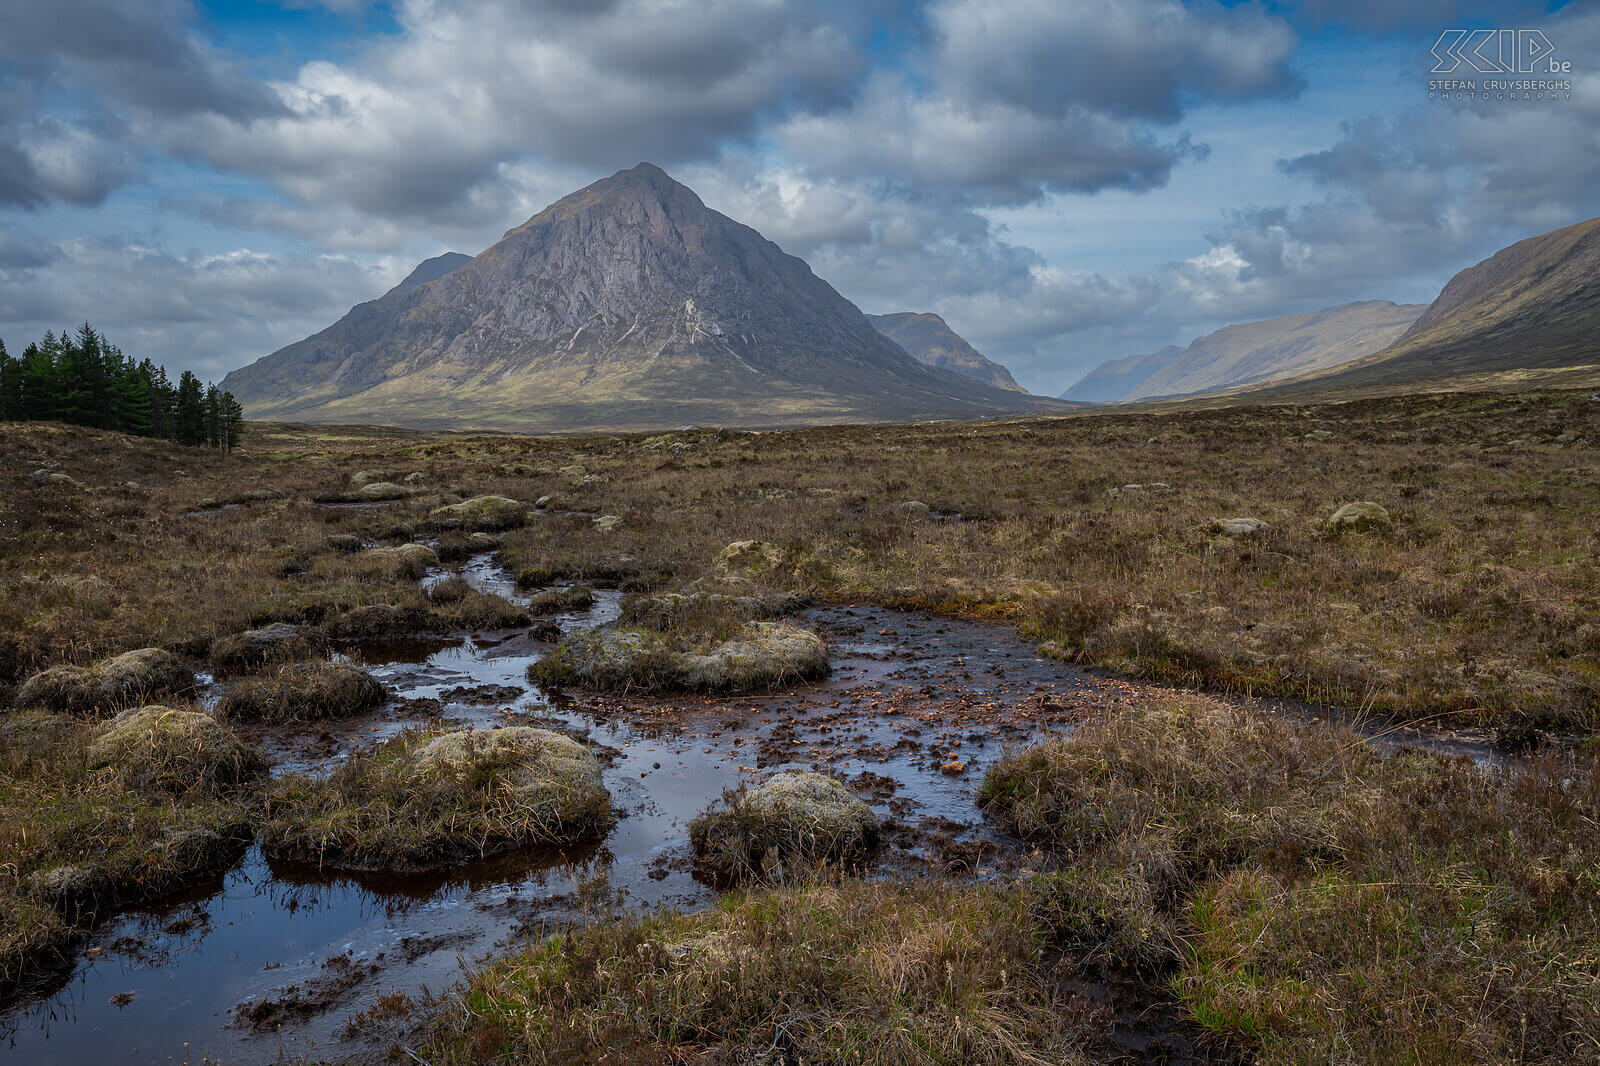 Glen Coe - Buachaille Etive Mòr Buachaille Etive Mòr is one of the best known and loved of all the Munro peaks in the Glen Coe valley in the Scottisch Highlands. Stefan Cruysberghs